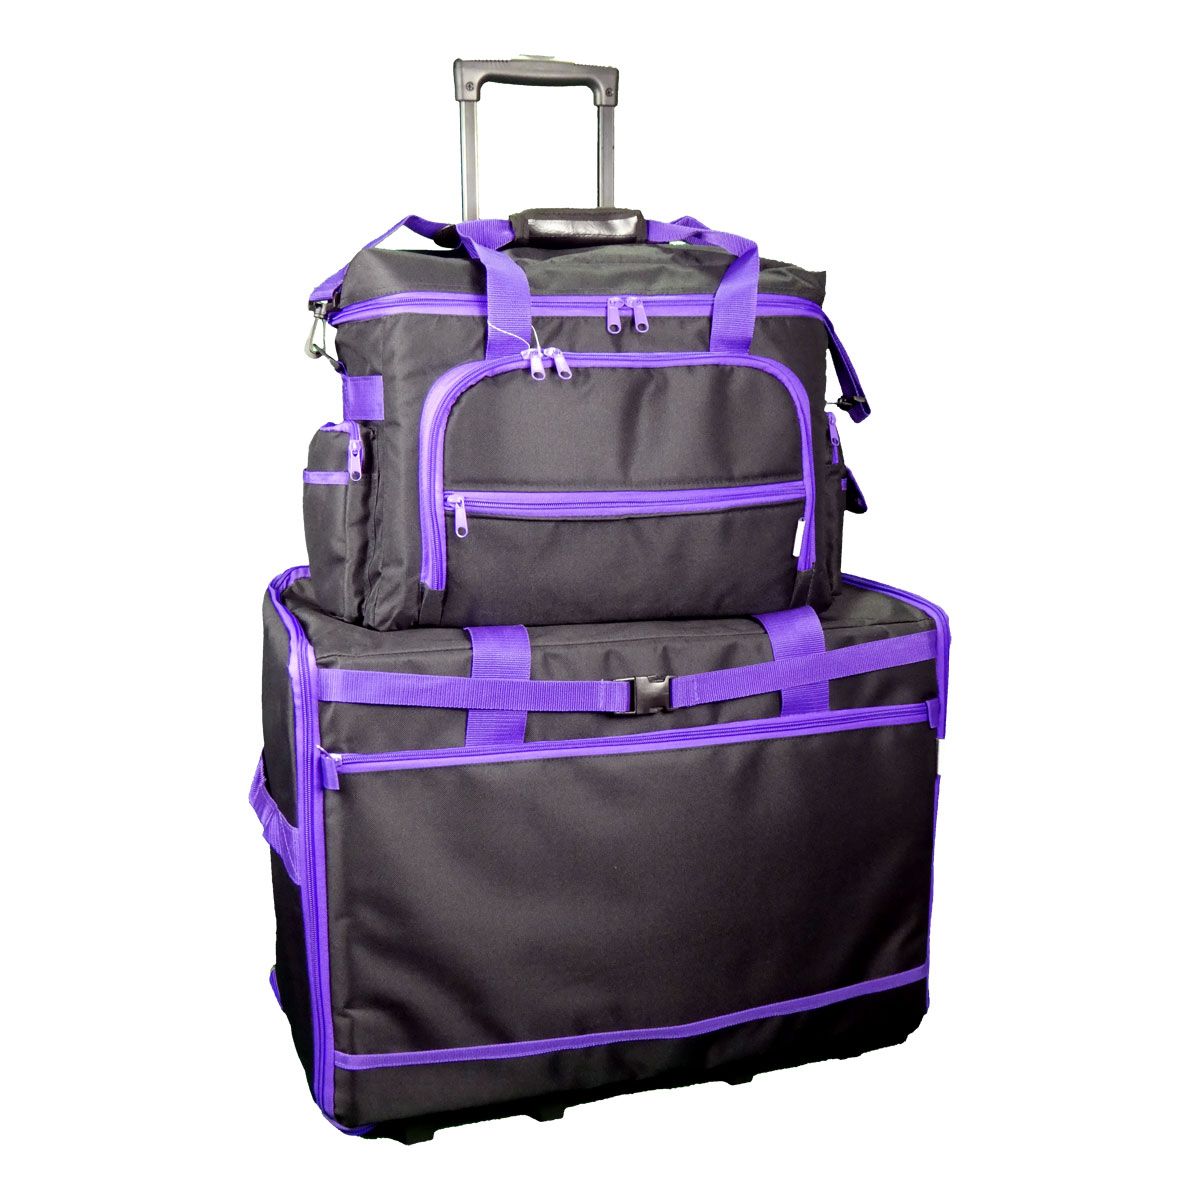 foolsGold Pro Thick Padded Sewing Machine Bag Carry Case Black/Purple 